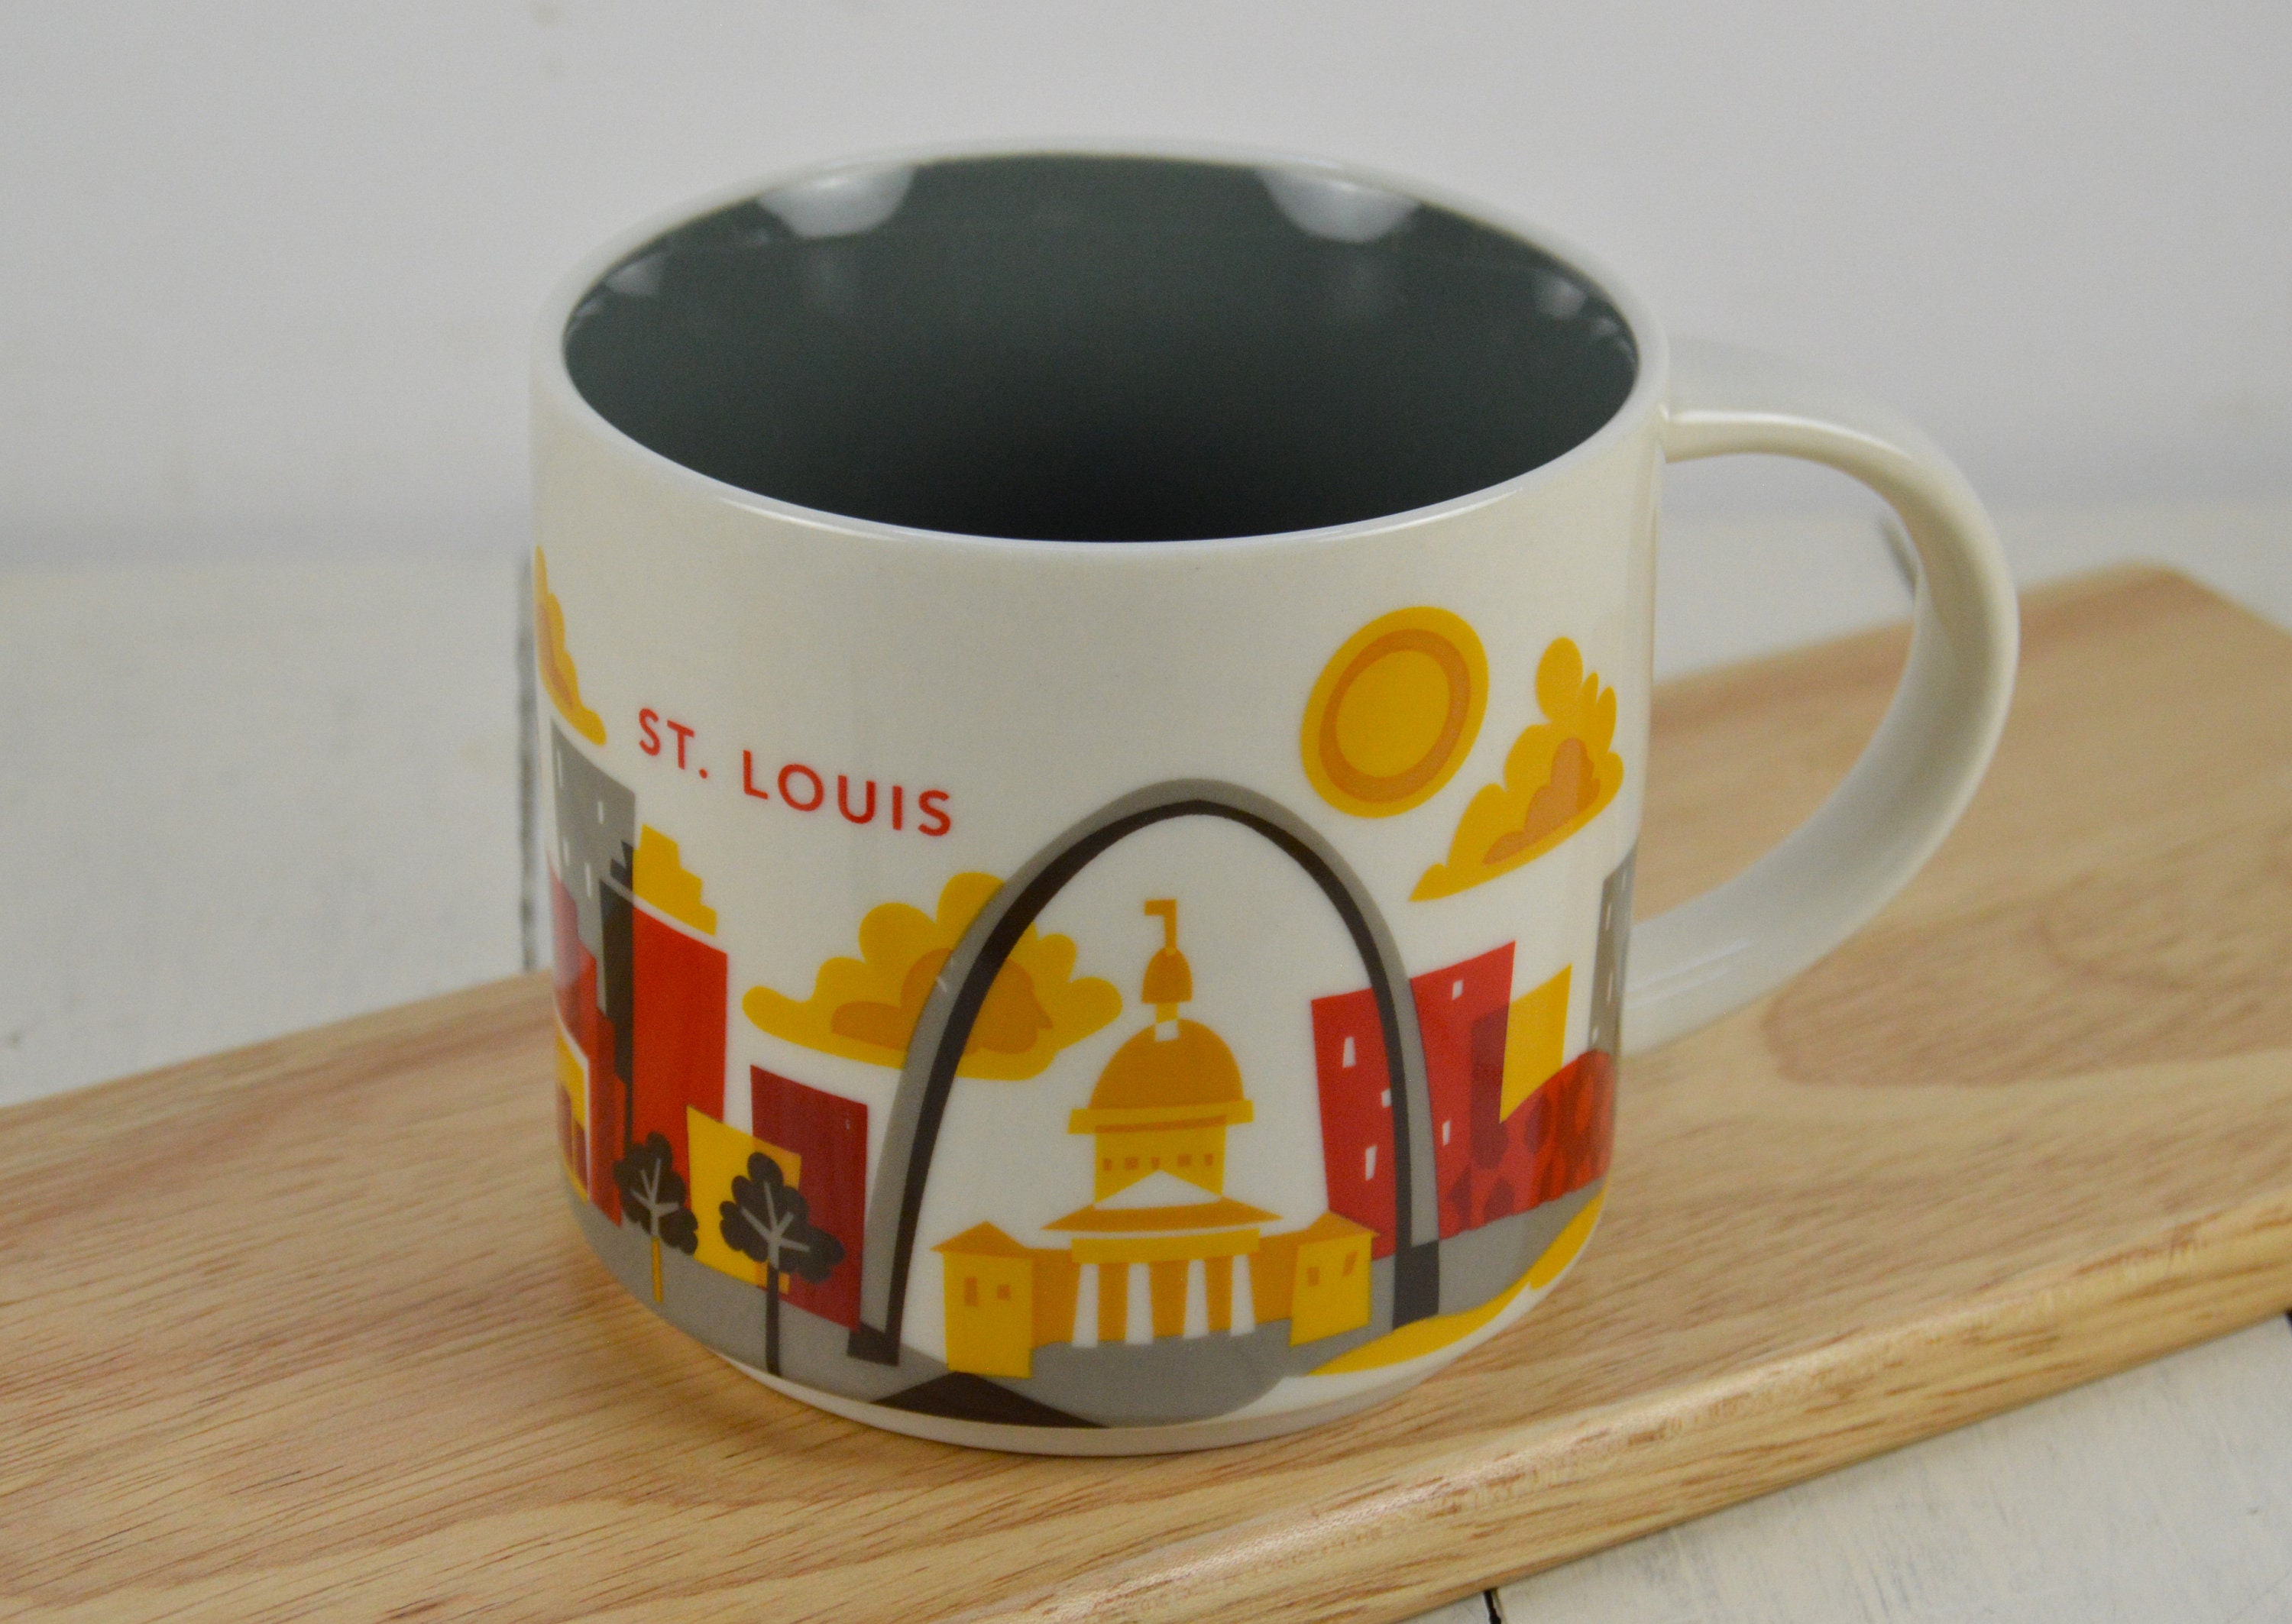 Starbucks St. Louis Been There Series Ceramic Coffee